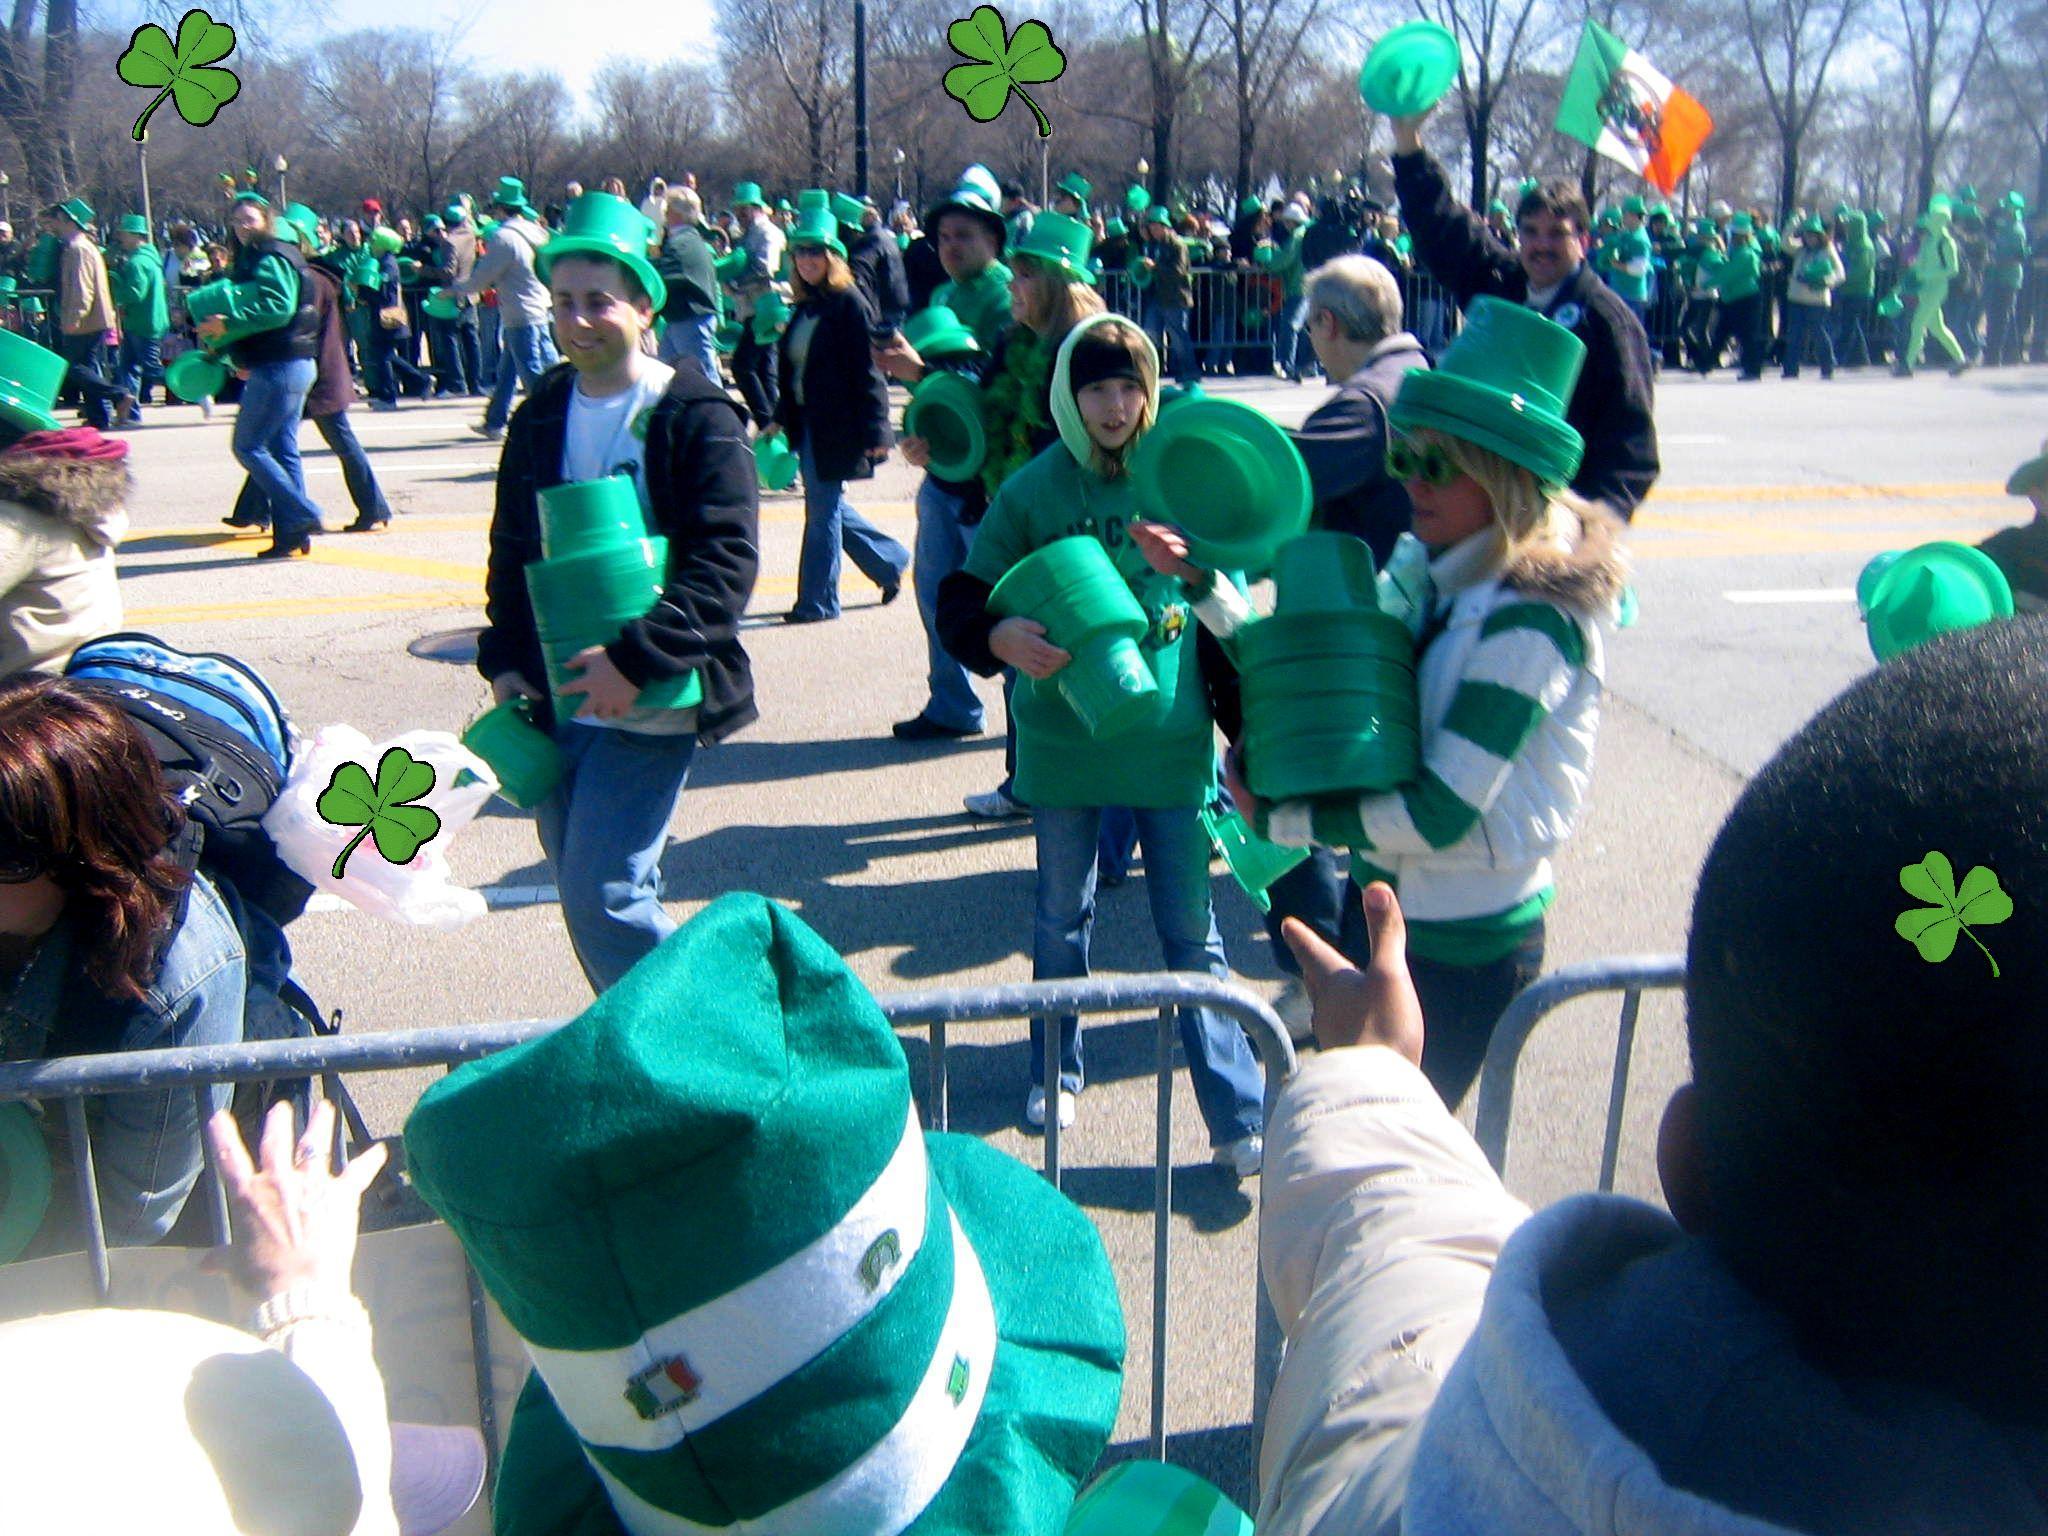 smiling  shamrocksss COLOR chicagos windy world with lyricALLL love!!! :):):)